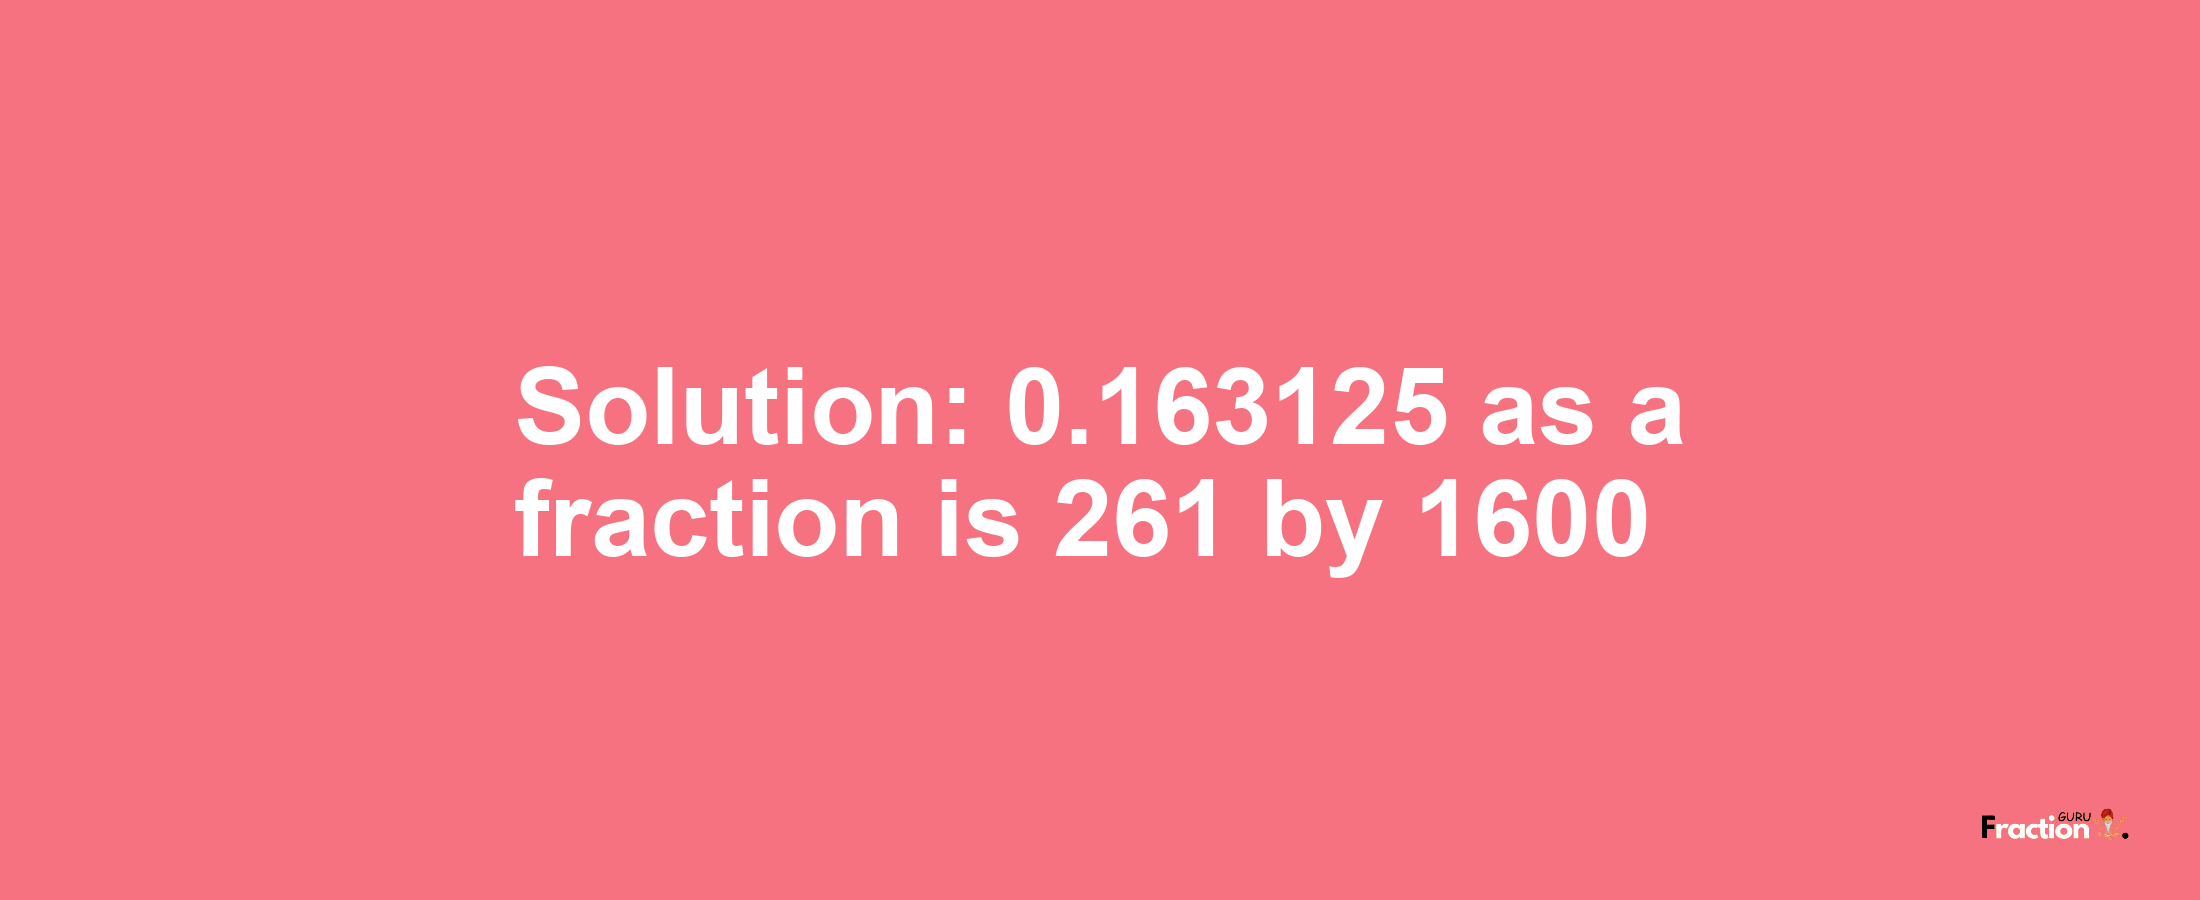 Solution:0.163125 as a fraction is 261/1600